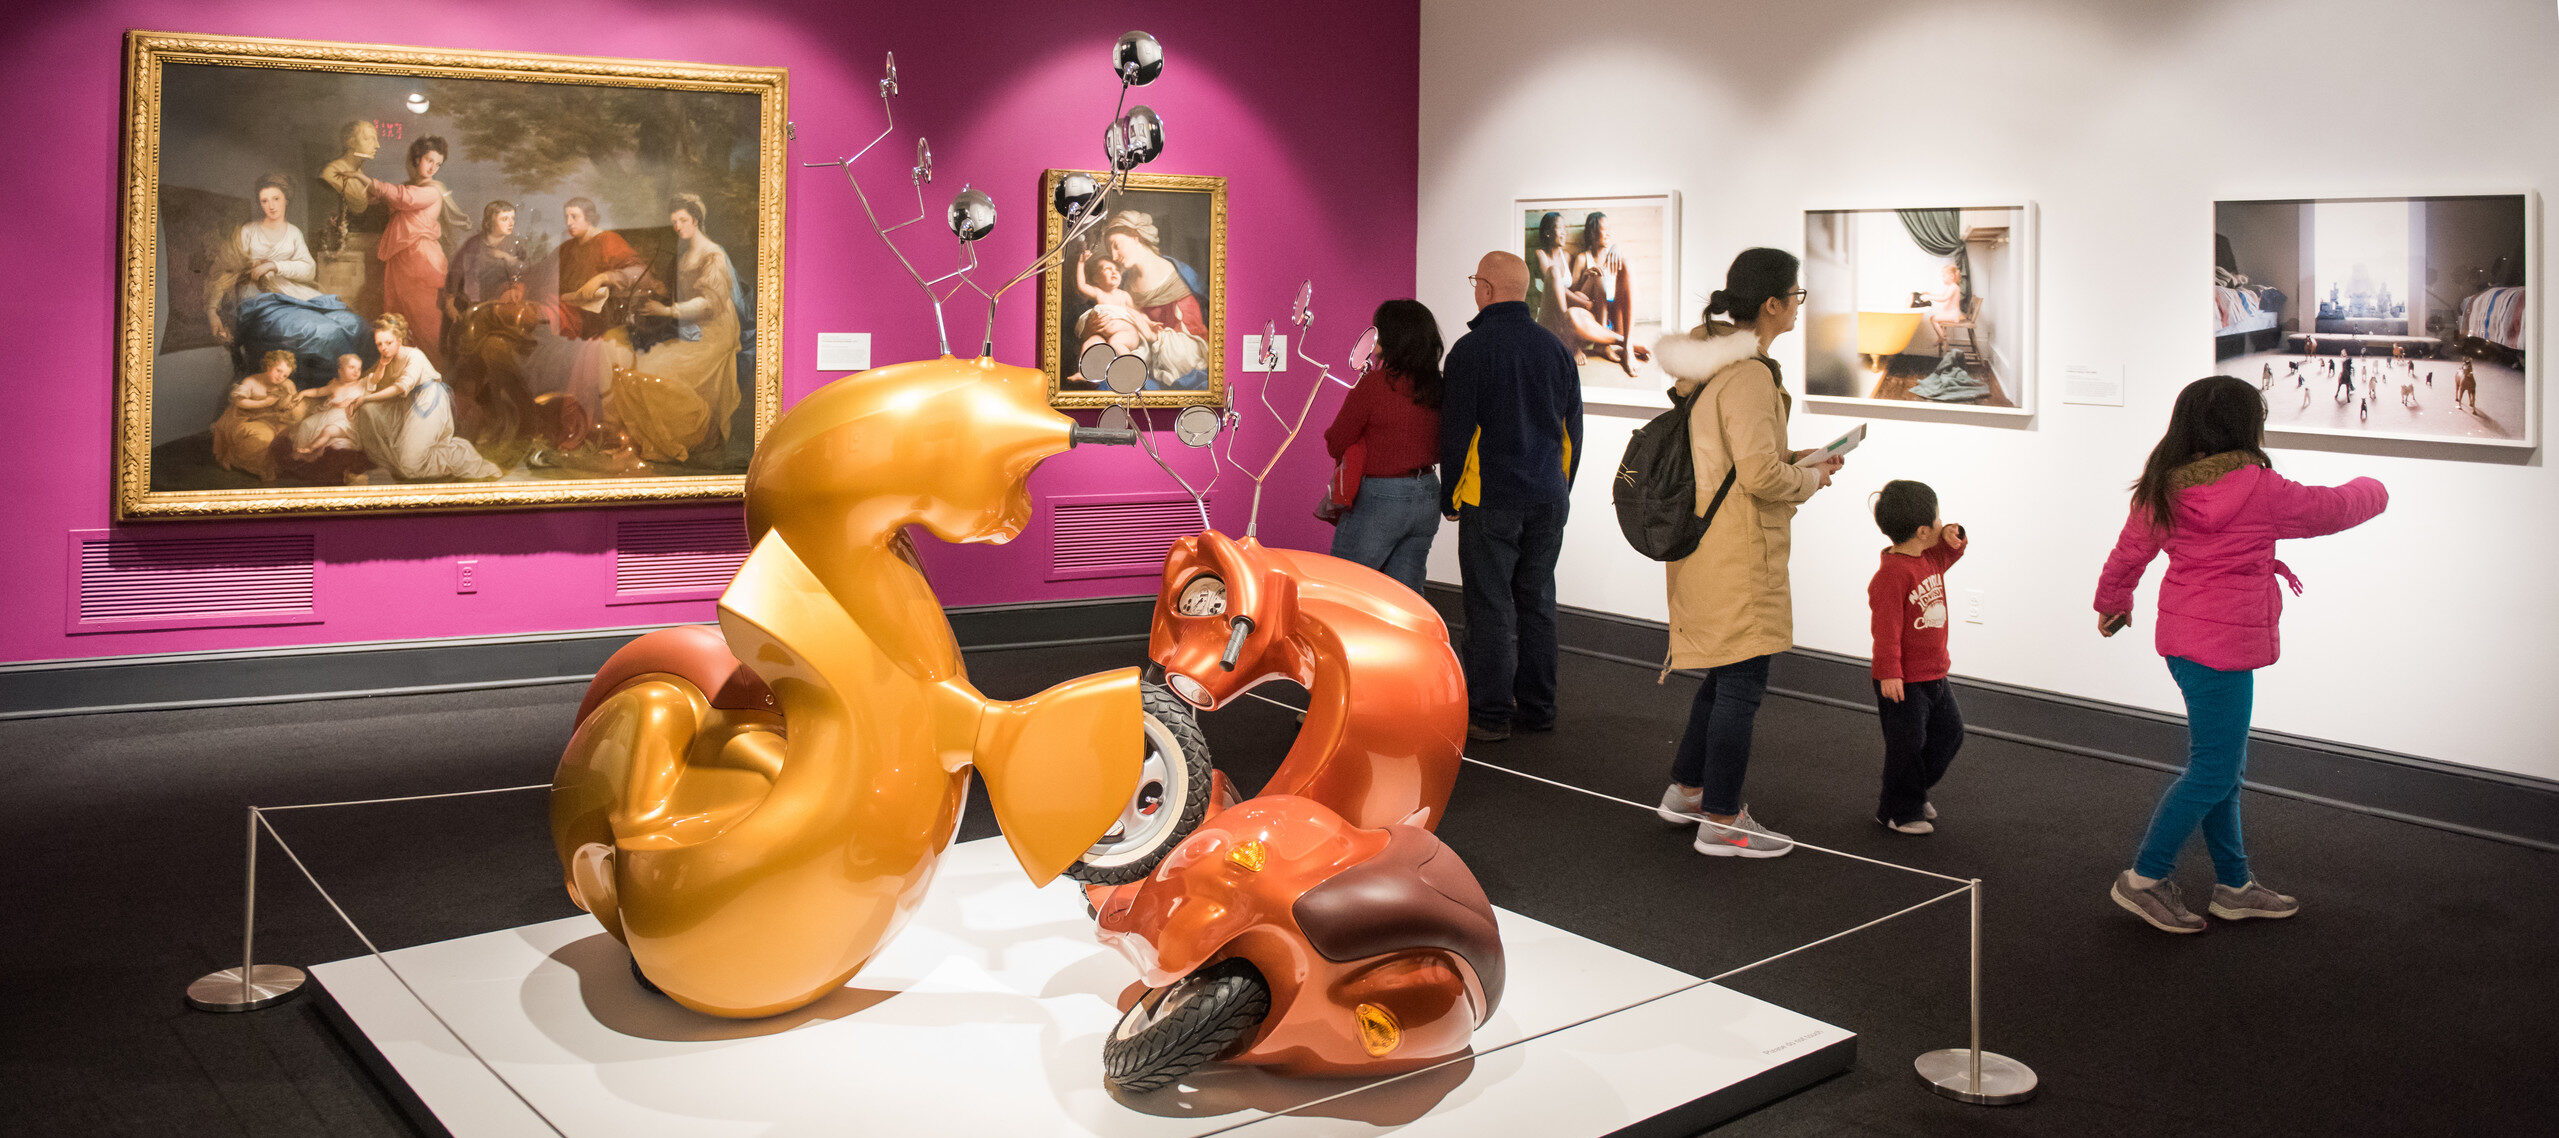 View of a gallery with walls painted magenta on the left and white on the right. In the middle is an installation of two stylized scooters that look like two deer interacting. To the right, three adults and two children look at different artworks mounted on the wall.